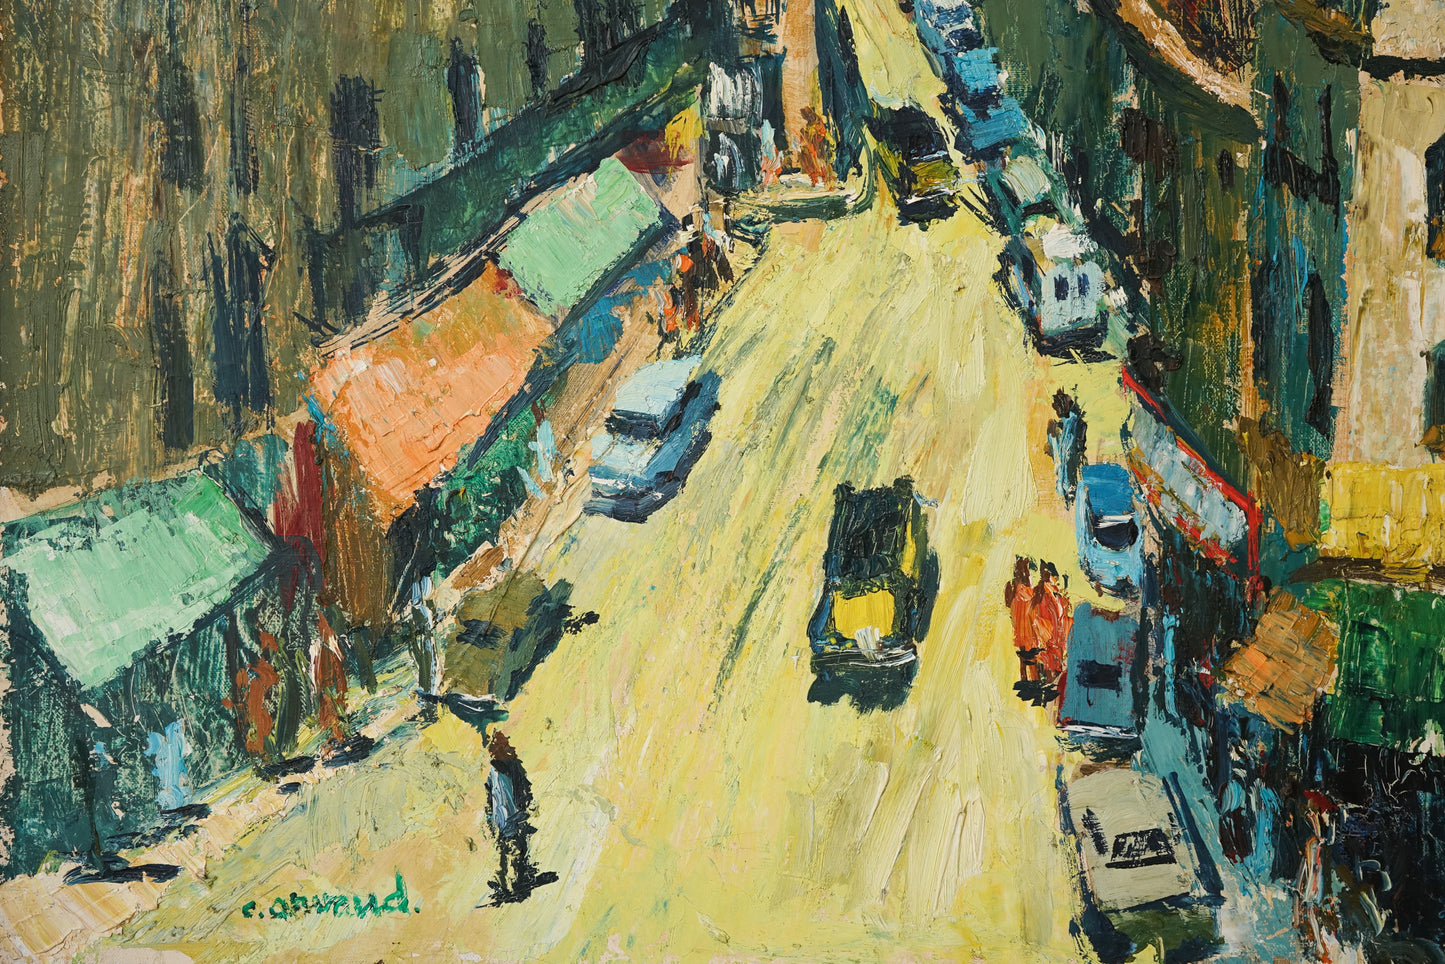 Vibrant Modernist Expressionist Street Scene With Mid-century Cars